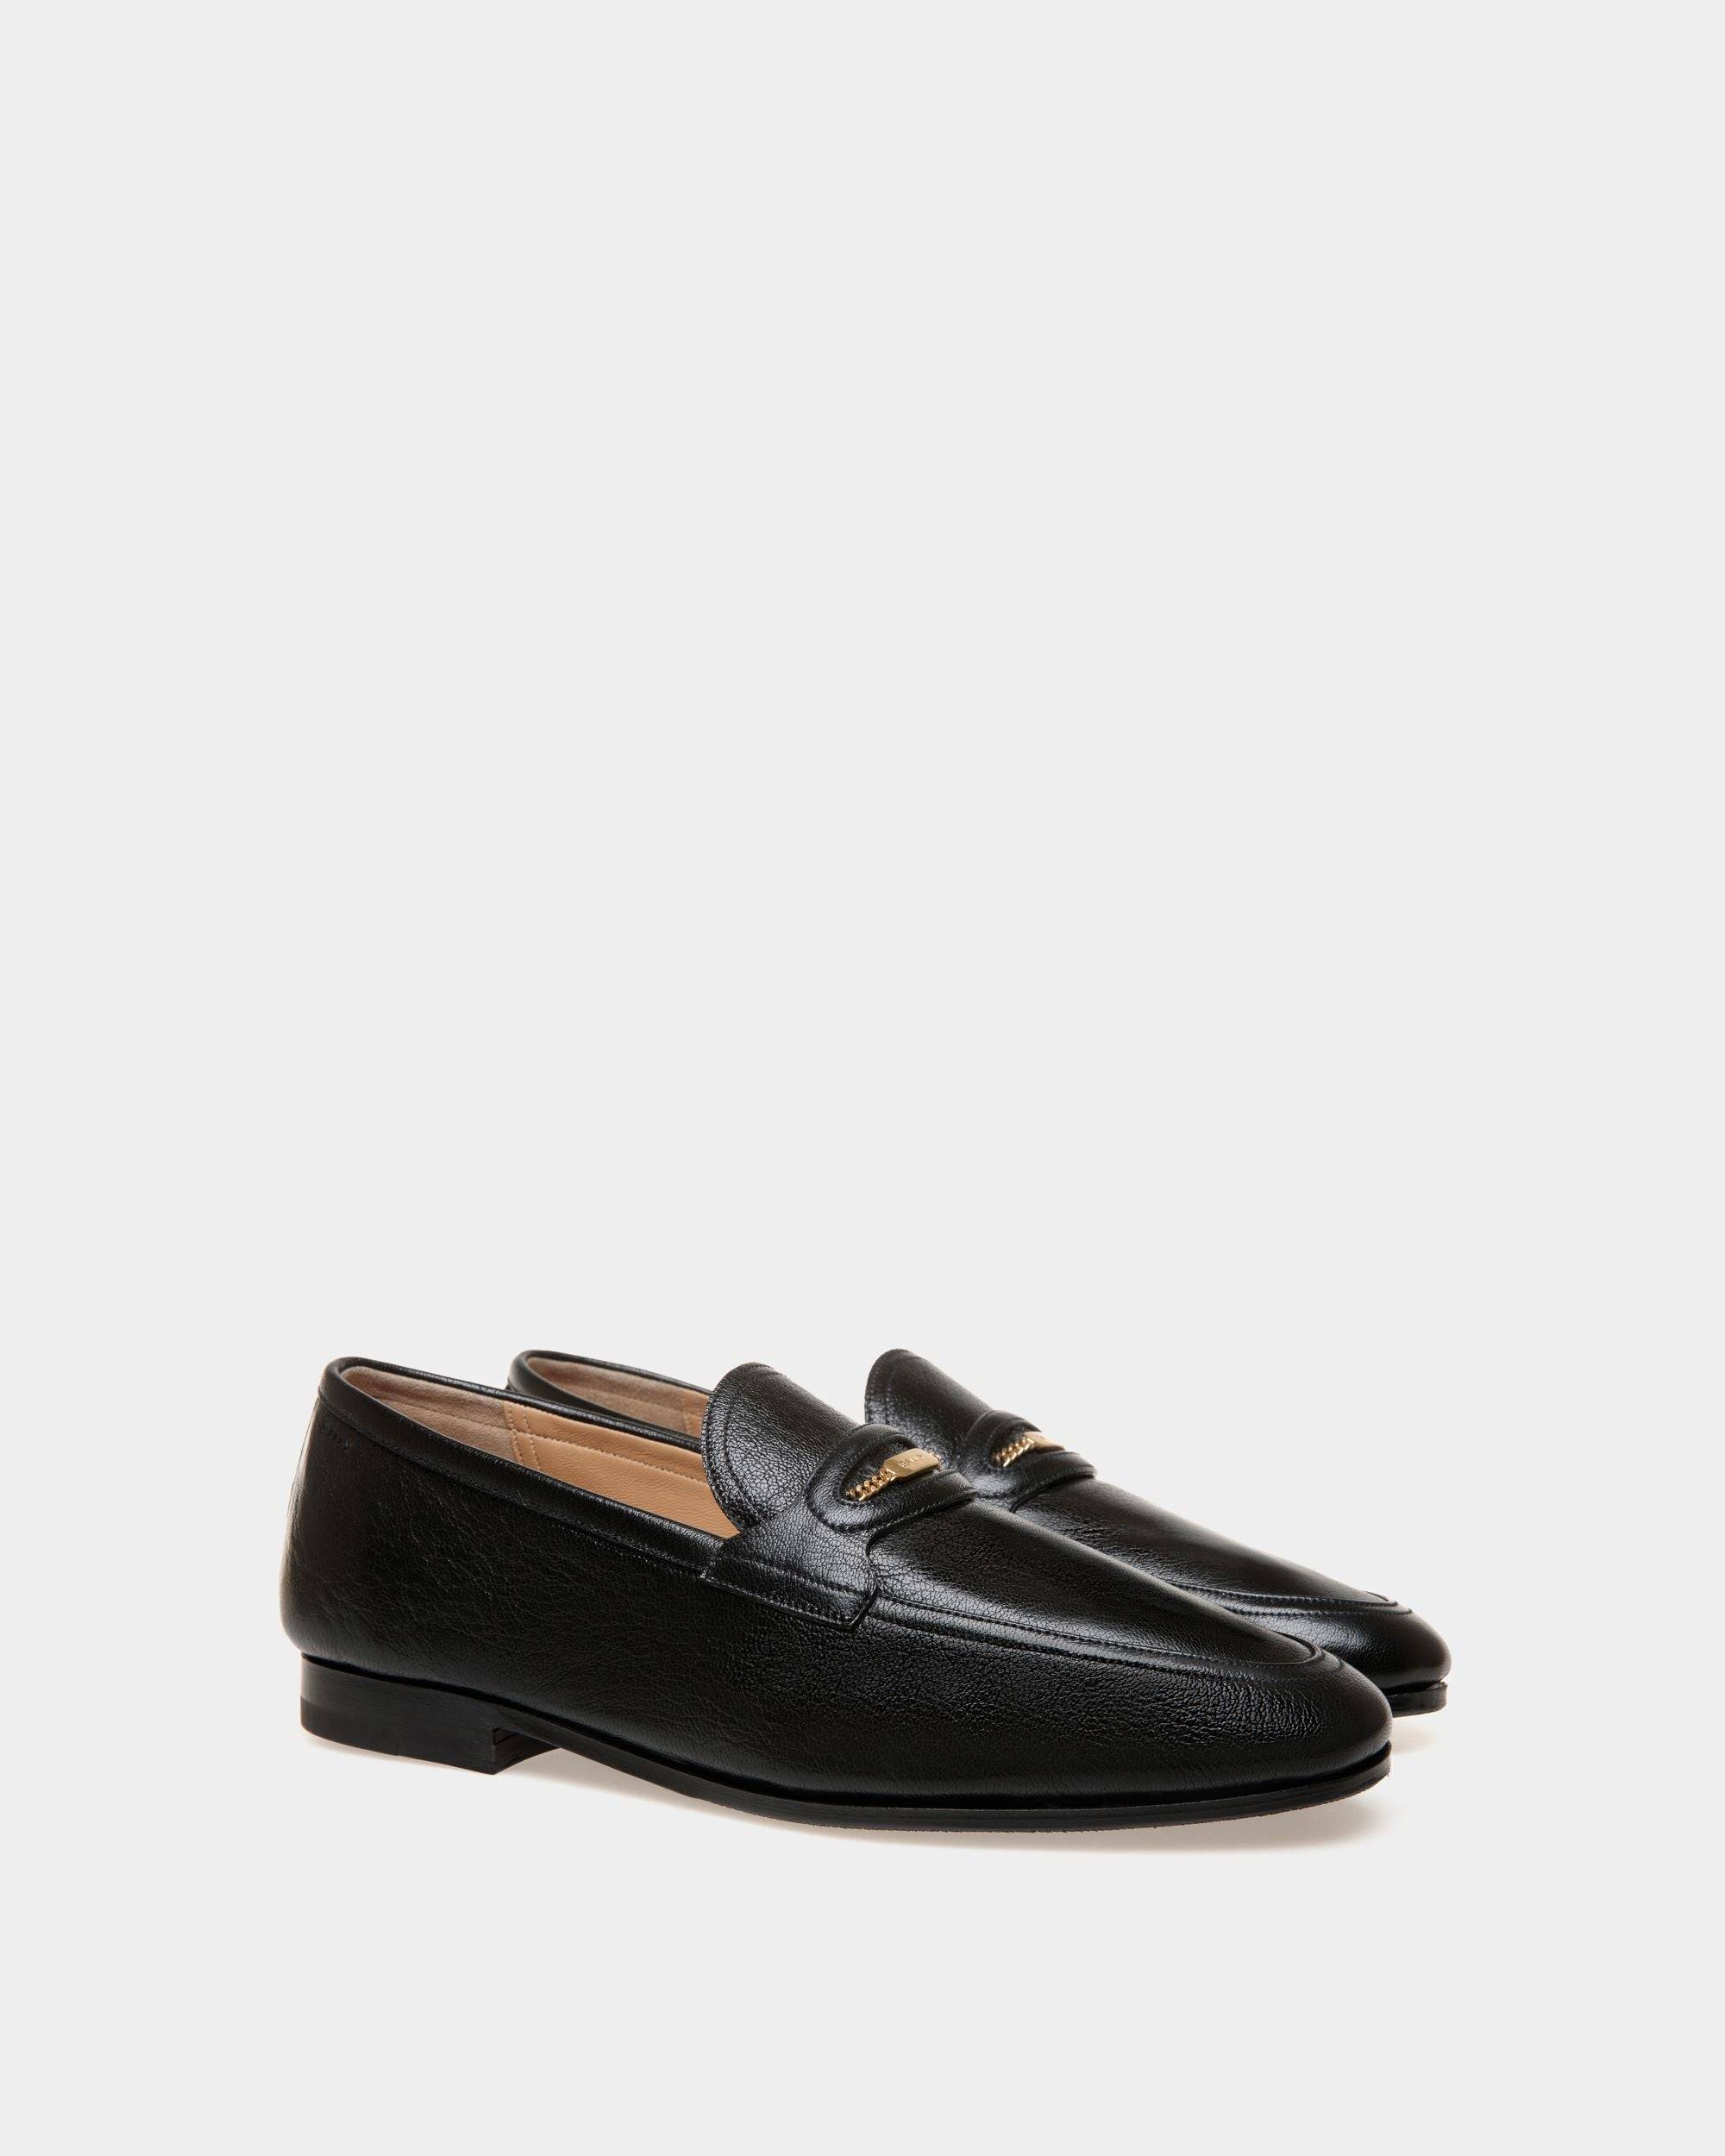 Plume | Men's Loafer in Black Grained Leather | Bally | Still Life 3/4 Front